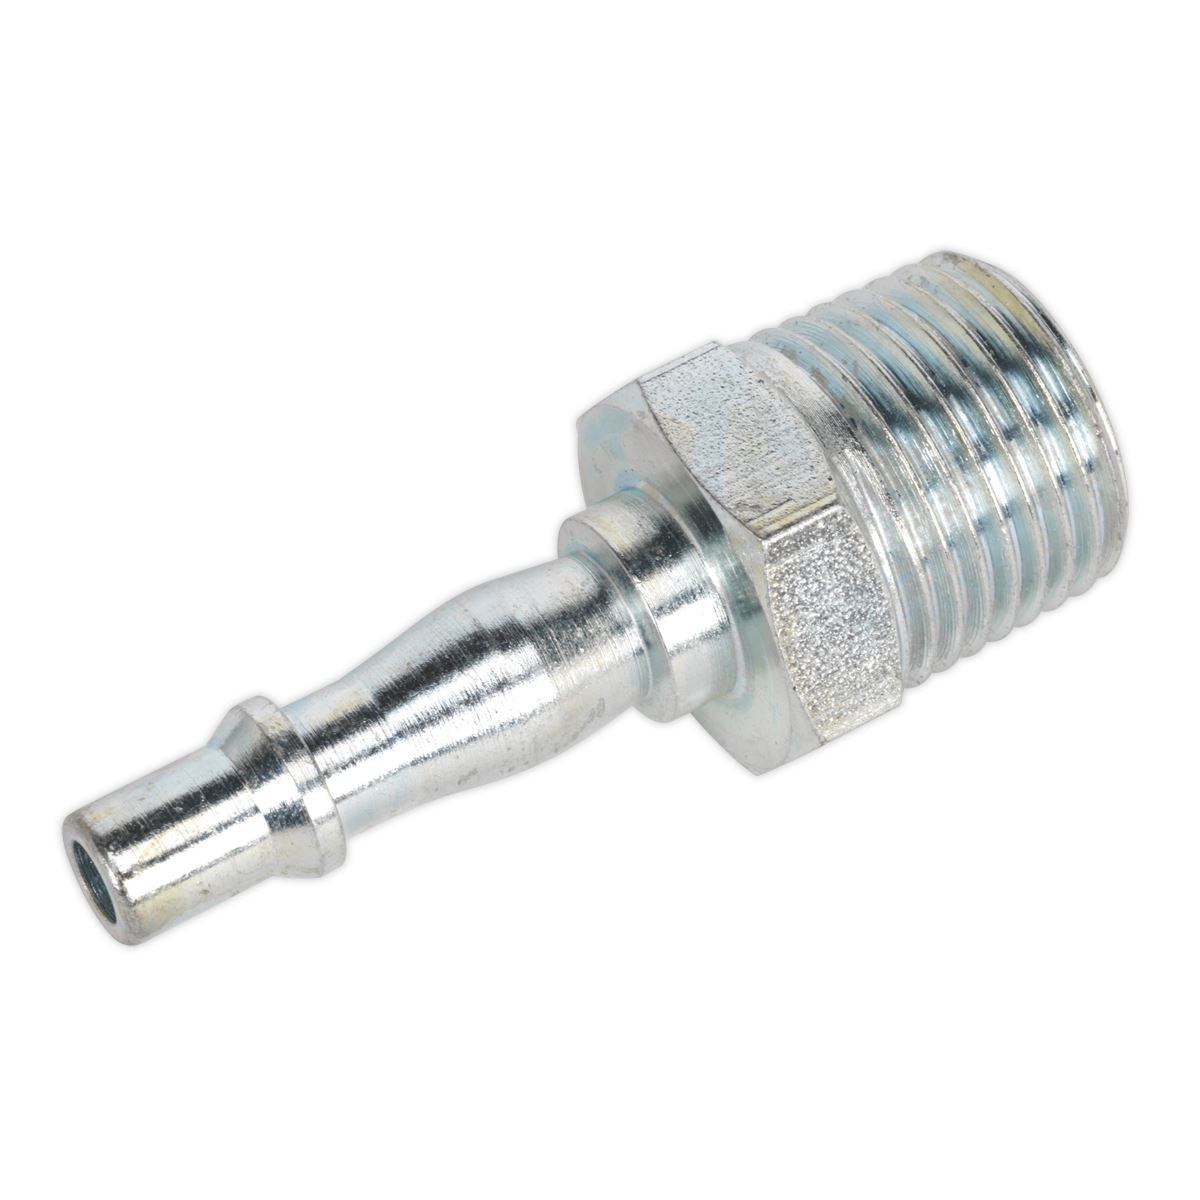 PCL Screwed Adaptor Male 1/2"BSPT Pack of 5